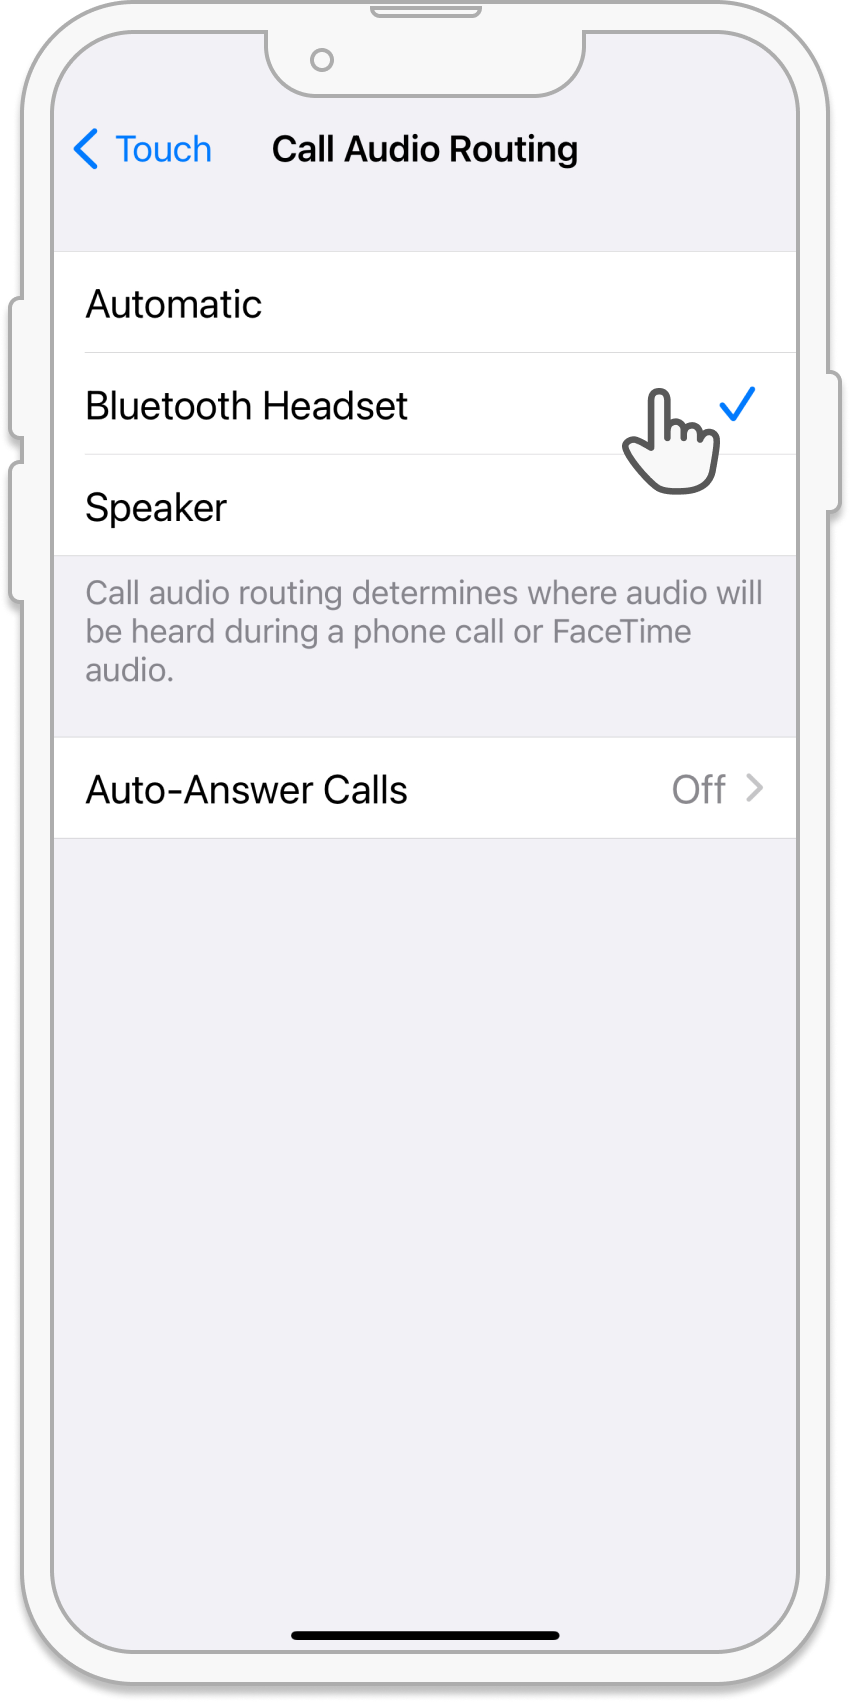 USR-SUP-002-73-_HP_Hearing_PRO_Support_Asset___Why_can_t_I_hear_my_phone_call_through_my_hearing_aids_-v1.0.png